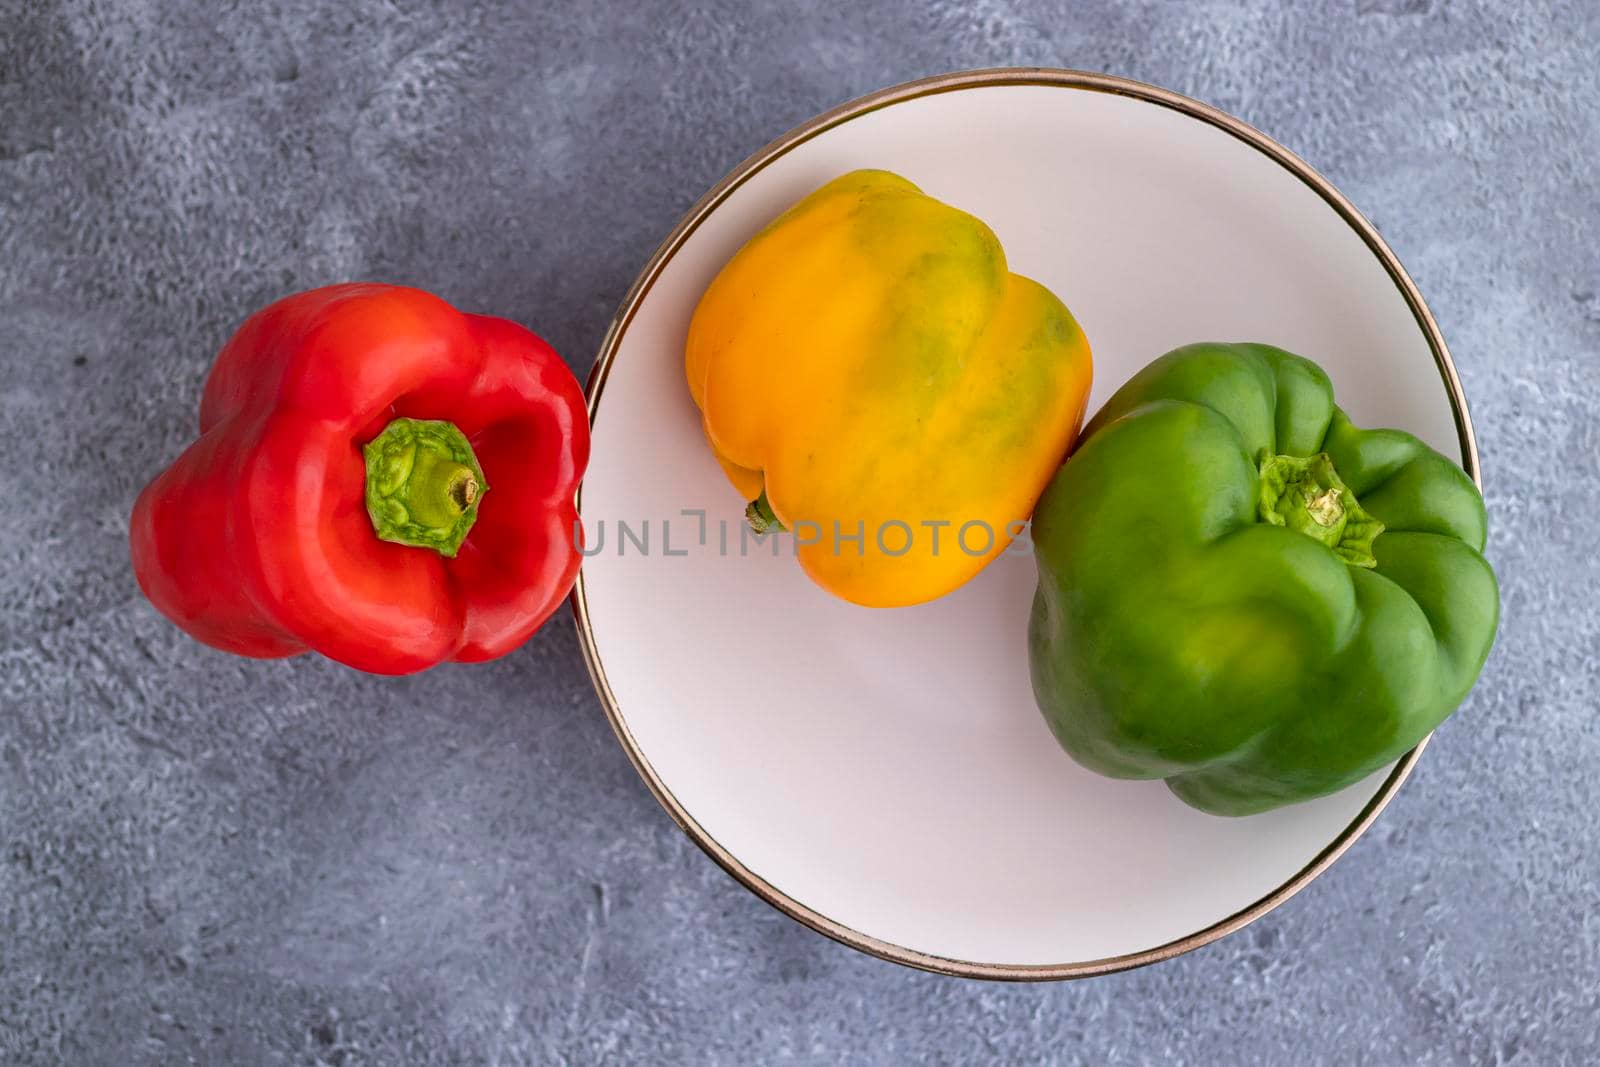 Aerial view of red, green and yellow peppers